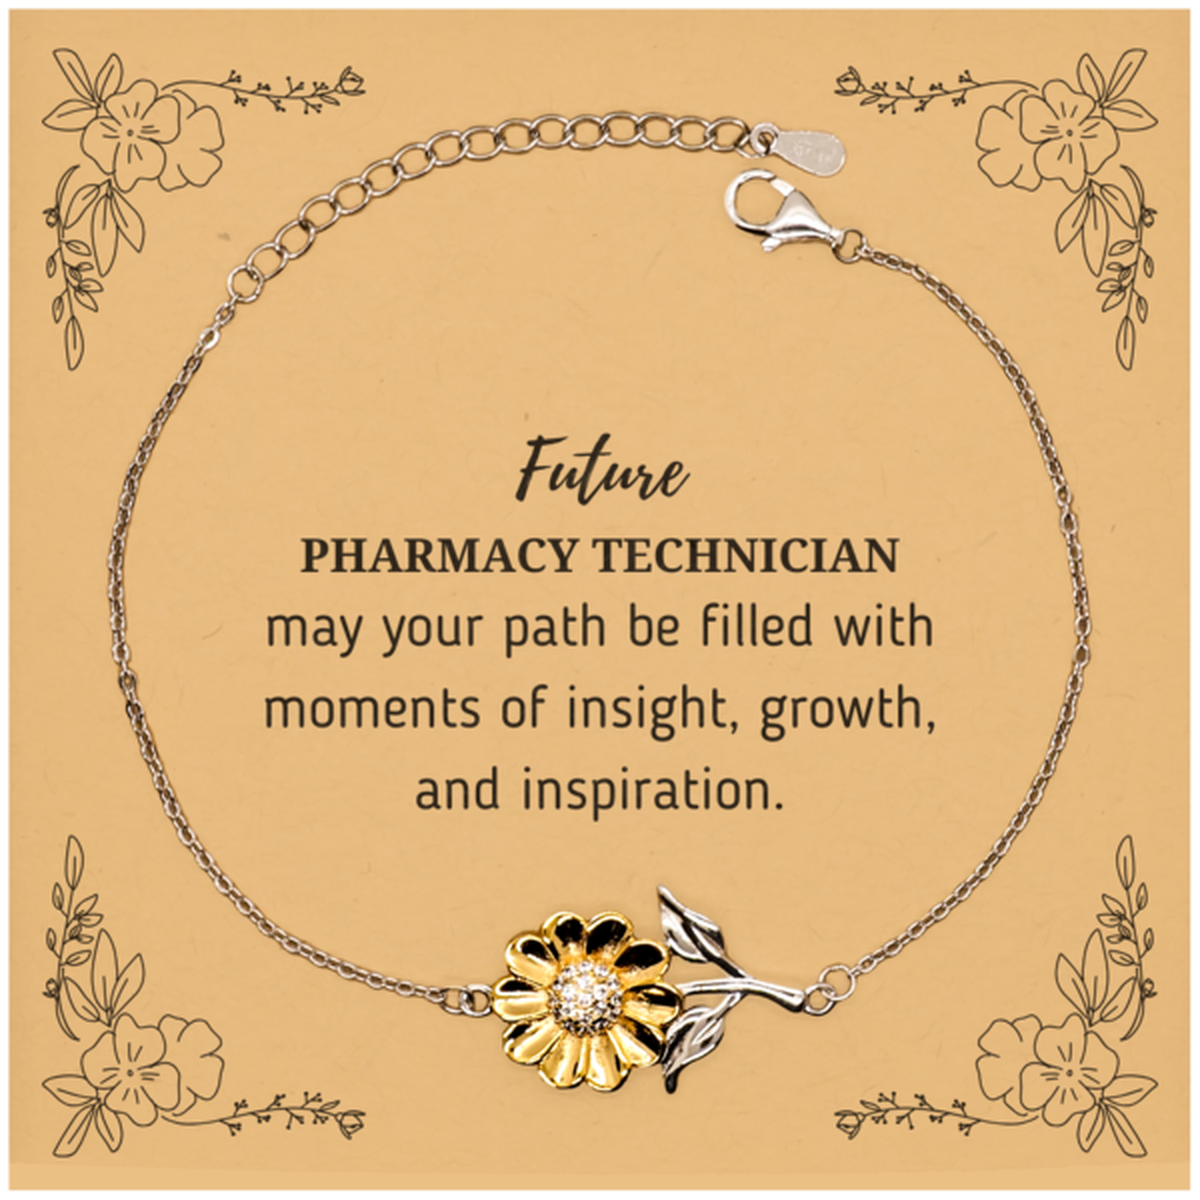 Future Pharmacy Technician Gifts, May your path be filled with moments of insight, Graduation Gifts for New Pharmacy Technician, Christmas Unique Sunflower Bracelet For Men, Women, Friends